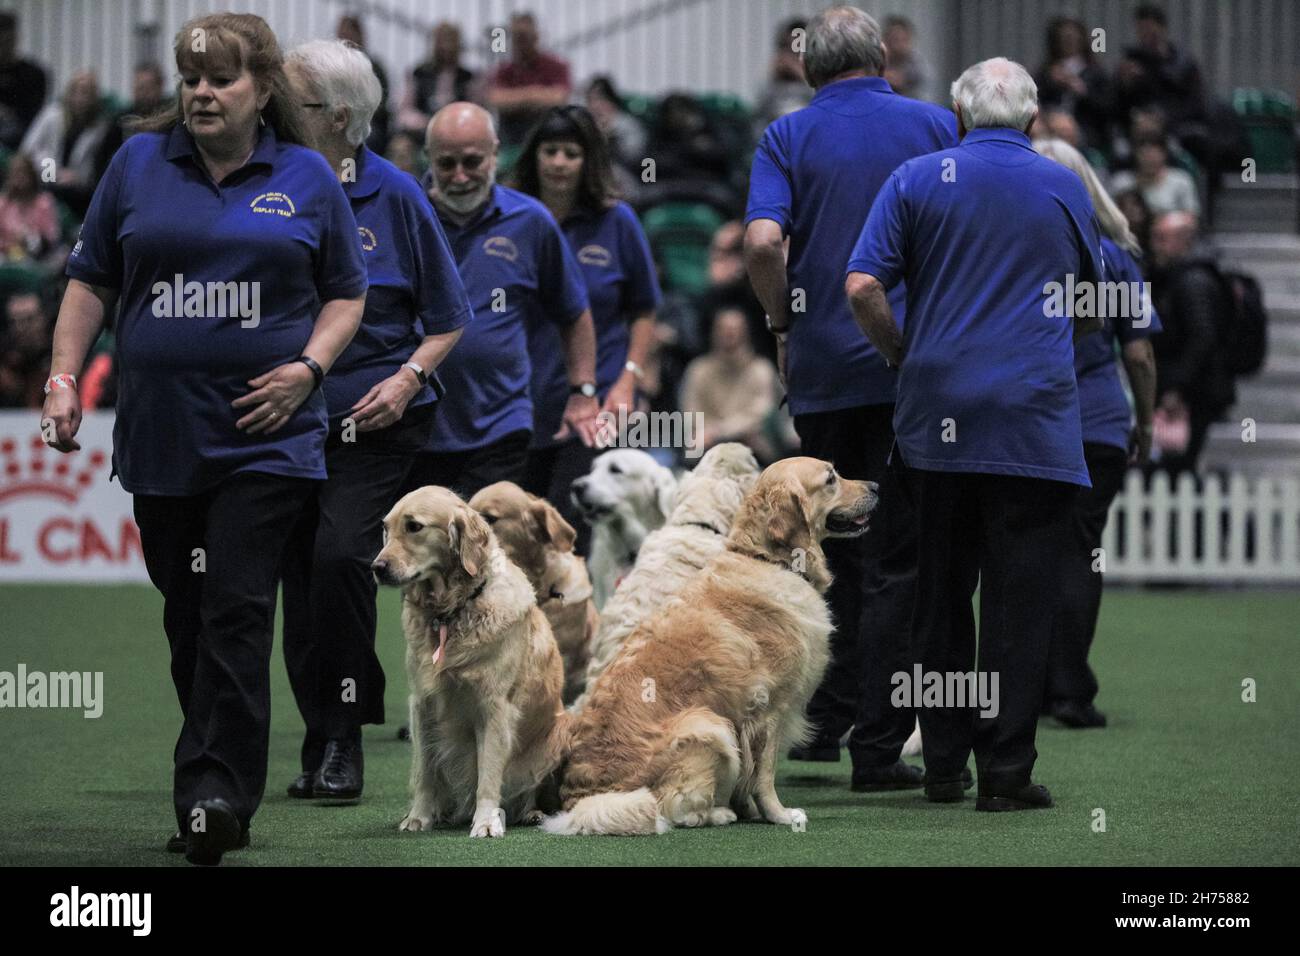 Excel Exhibition Centre, London, UK. 20th Nov, 2021. The Golden Retrievers  from the Southern Golden Retriever Display Team in the show arena with  their owners are a big hit with the audience.